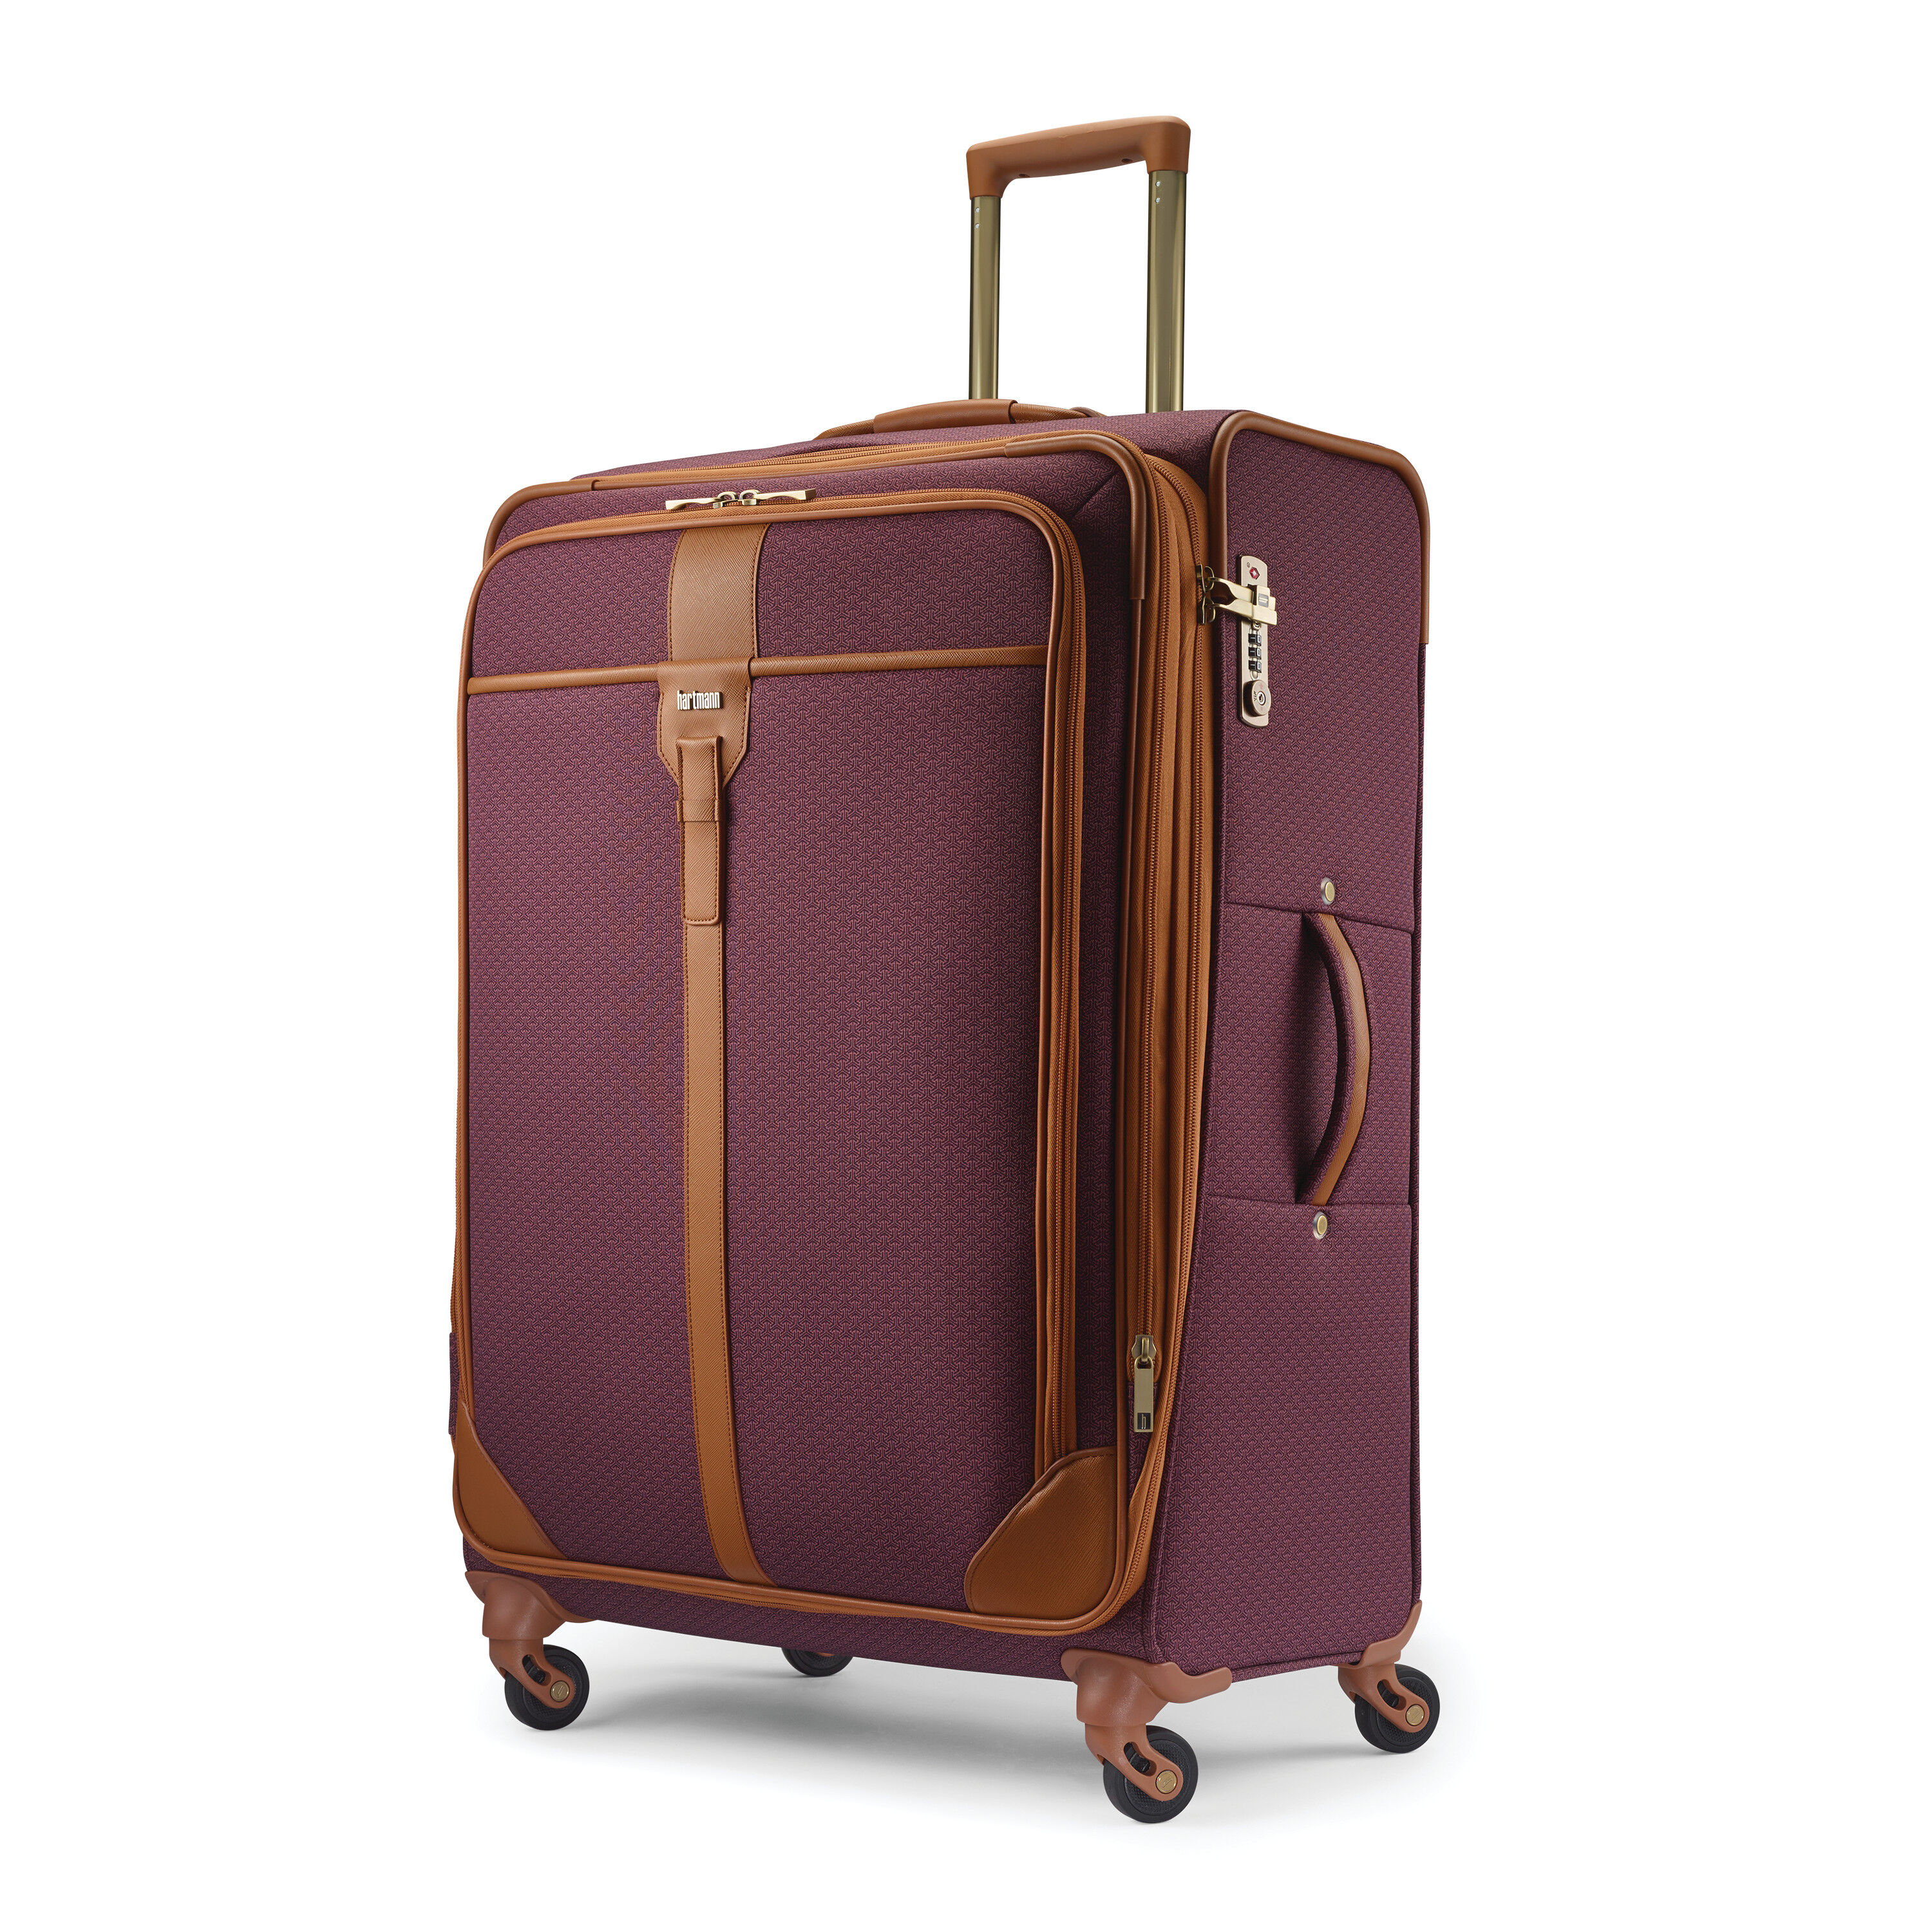 Luggage | Exquisite Styles for Discerning Travelers | Hartmann